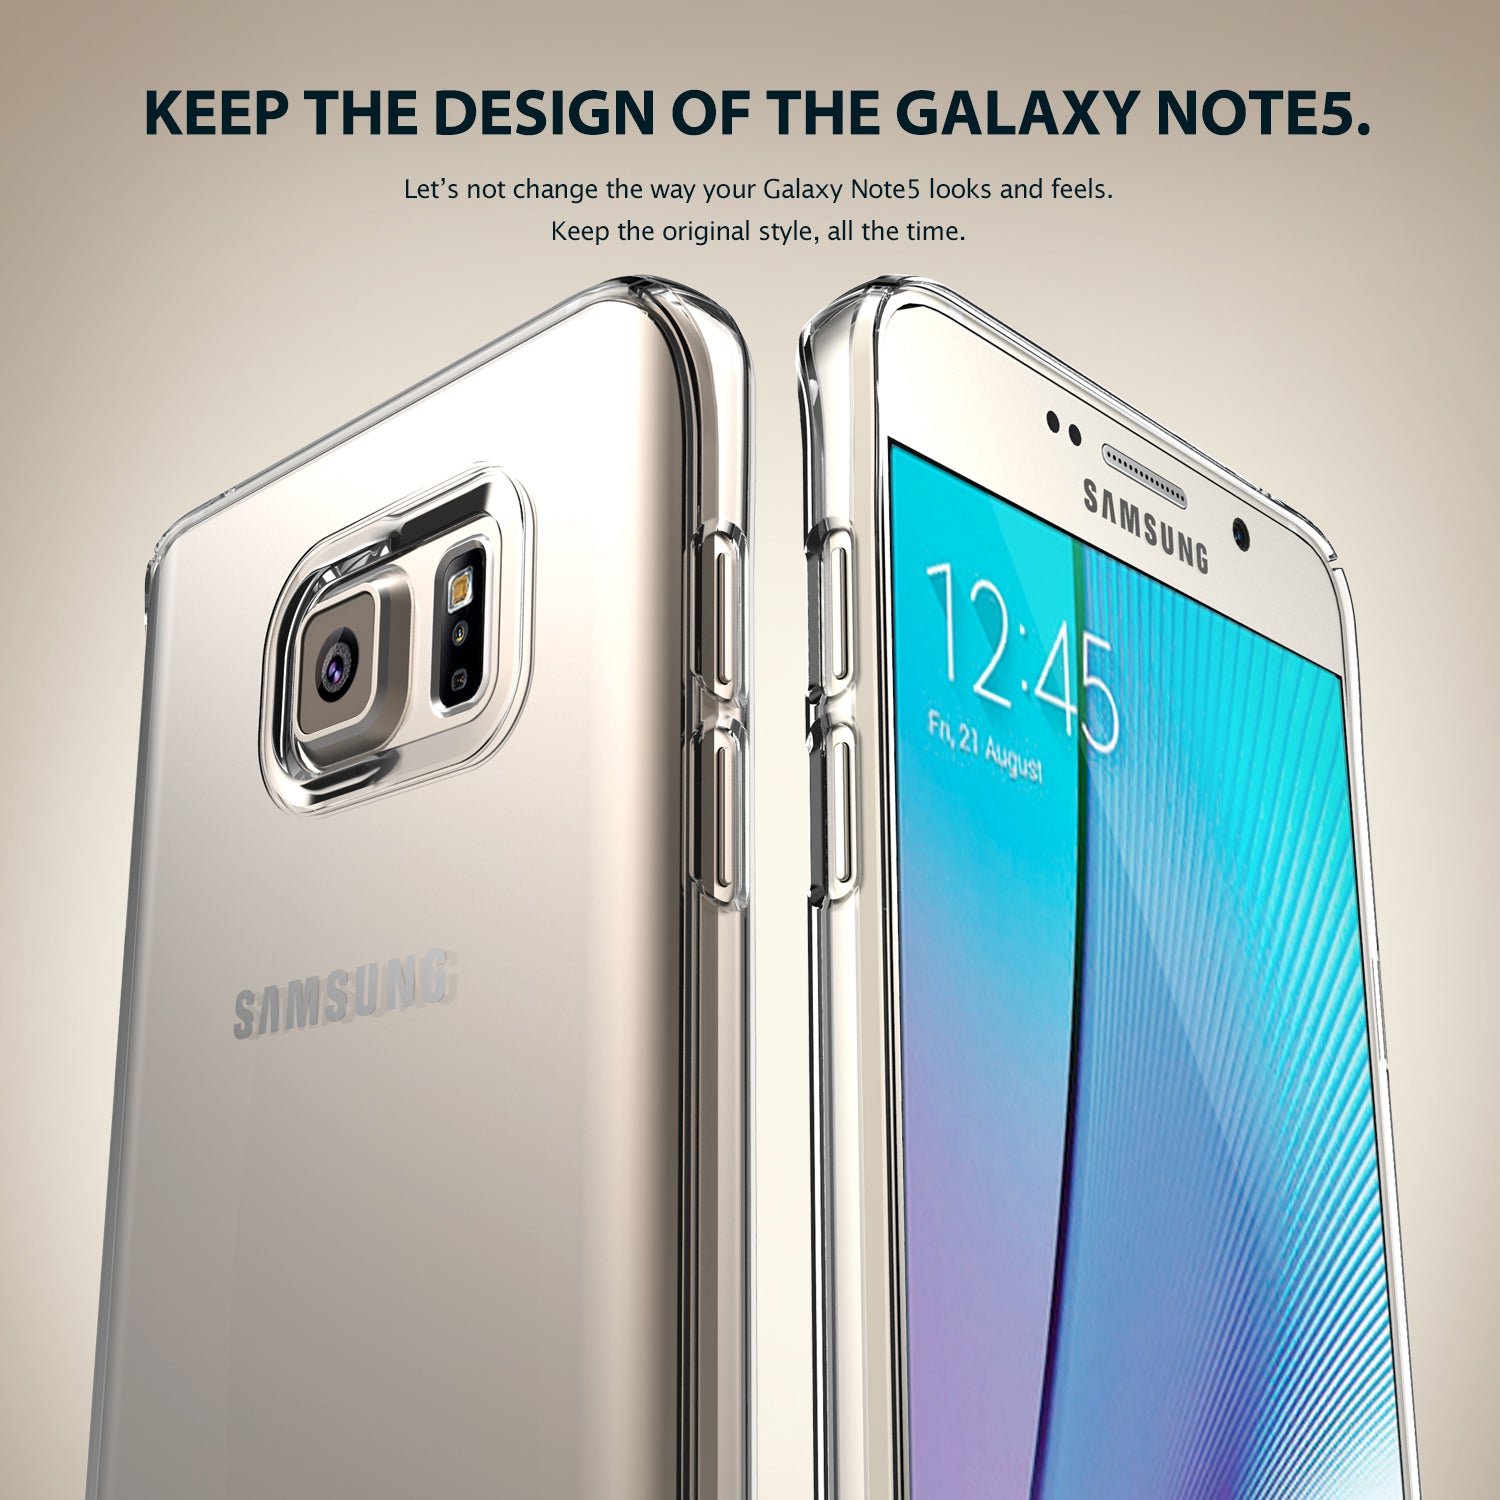 keep the design of the galaxy note 5